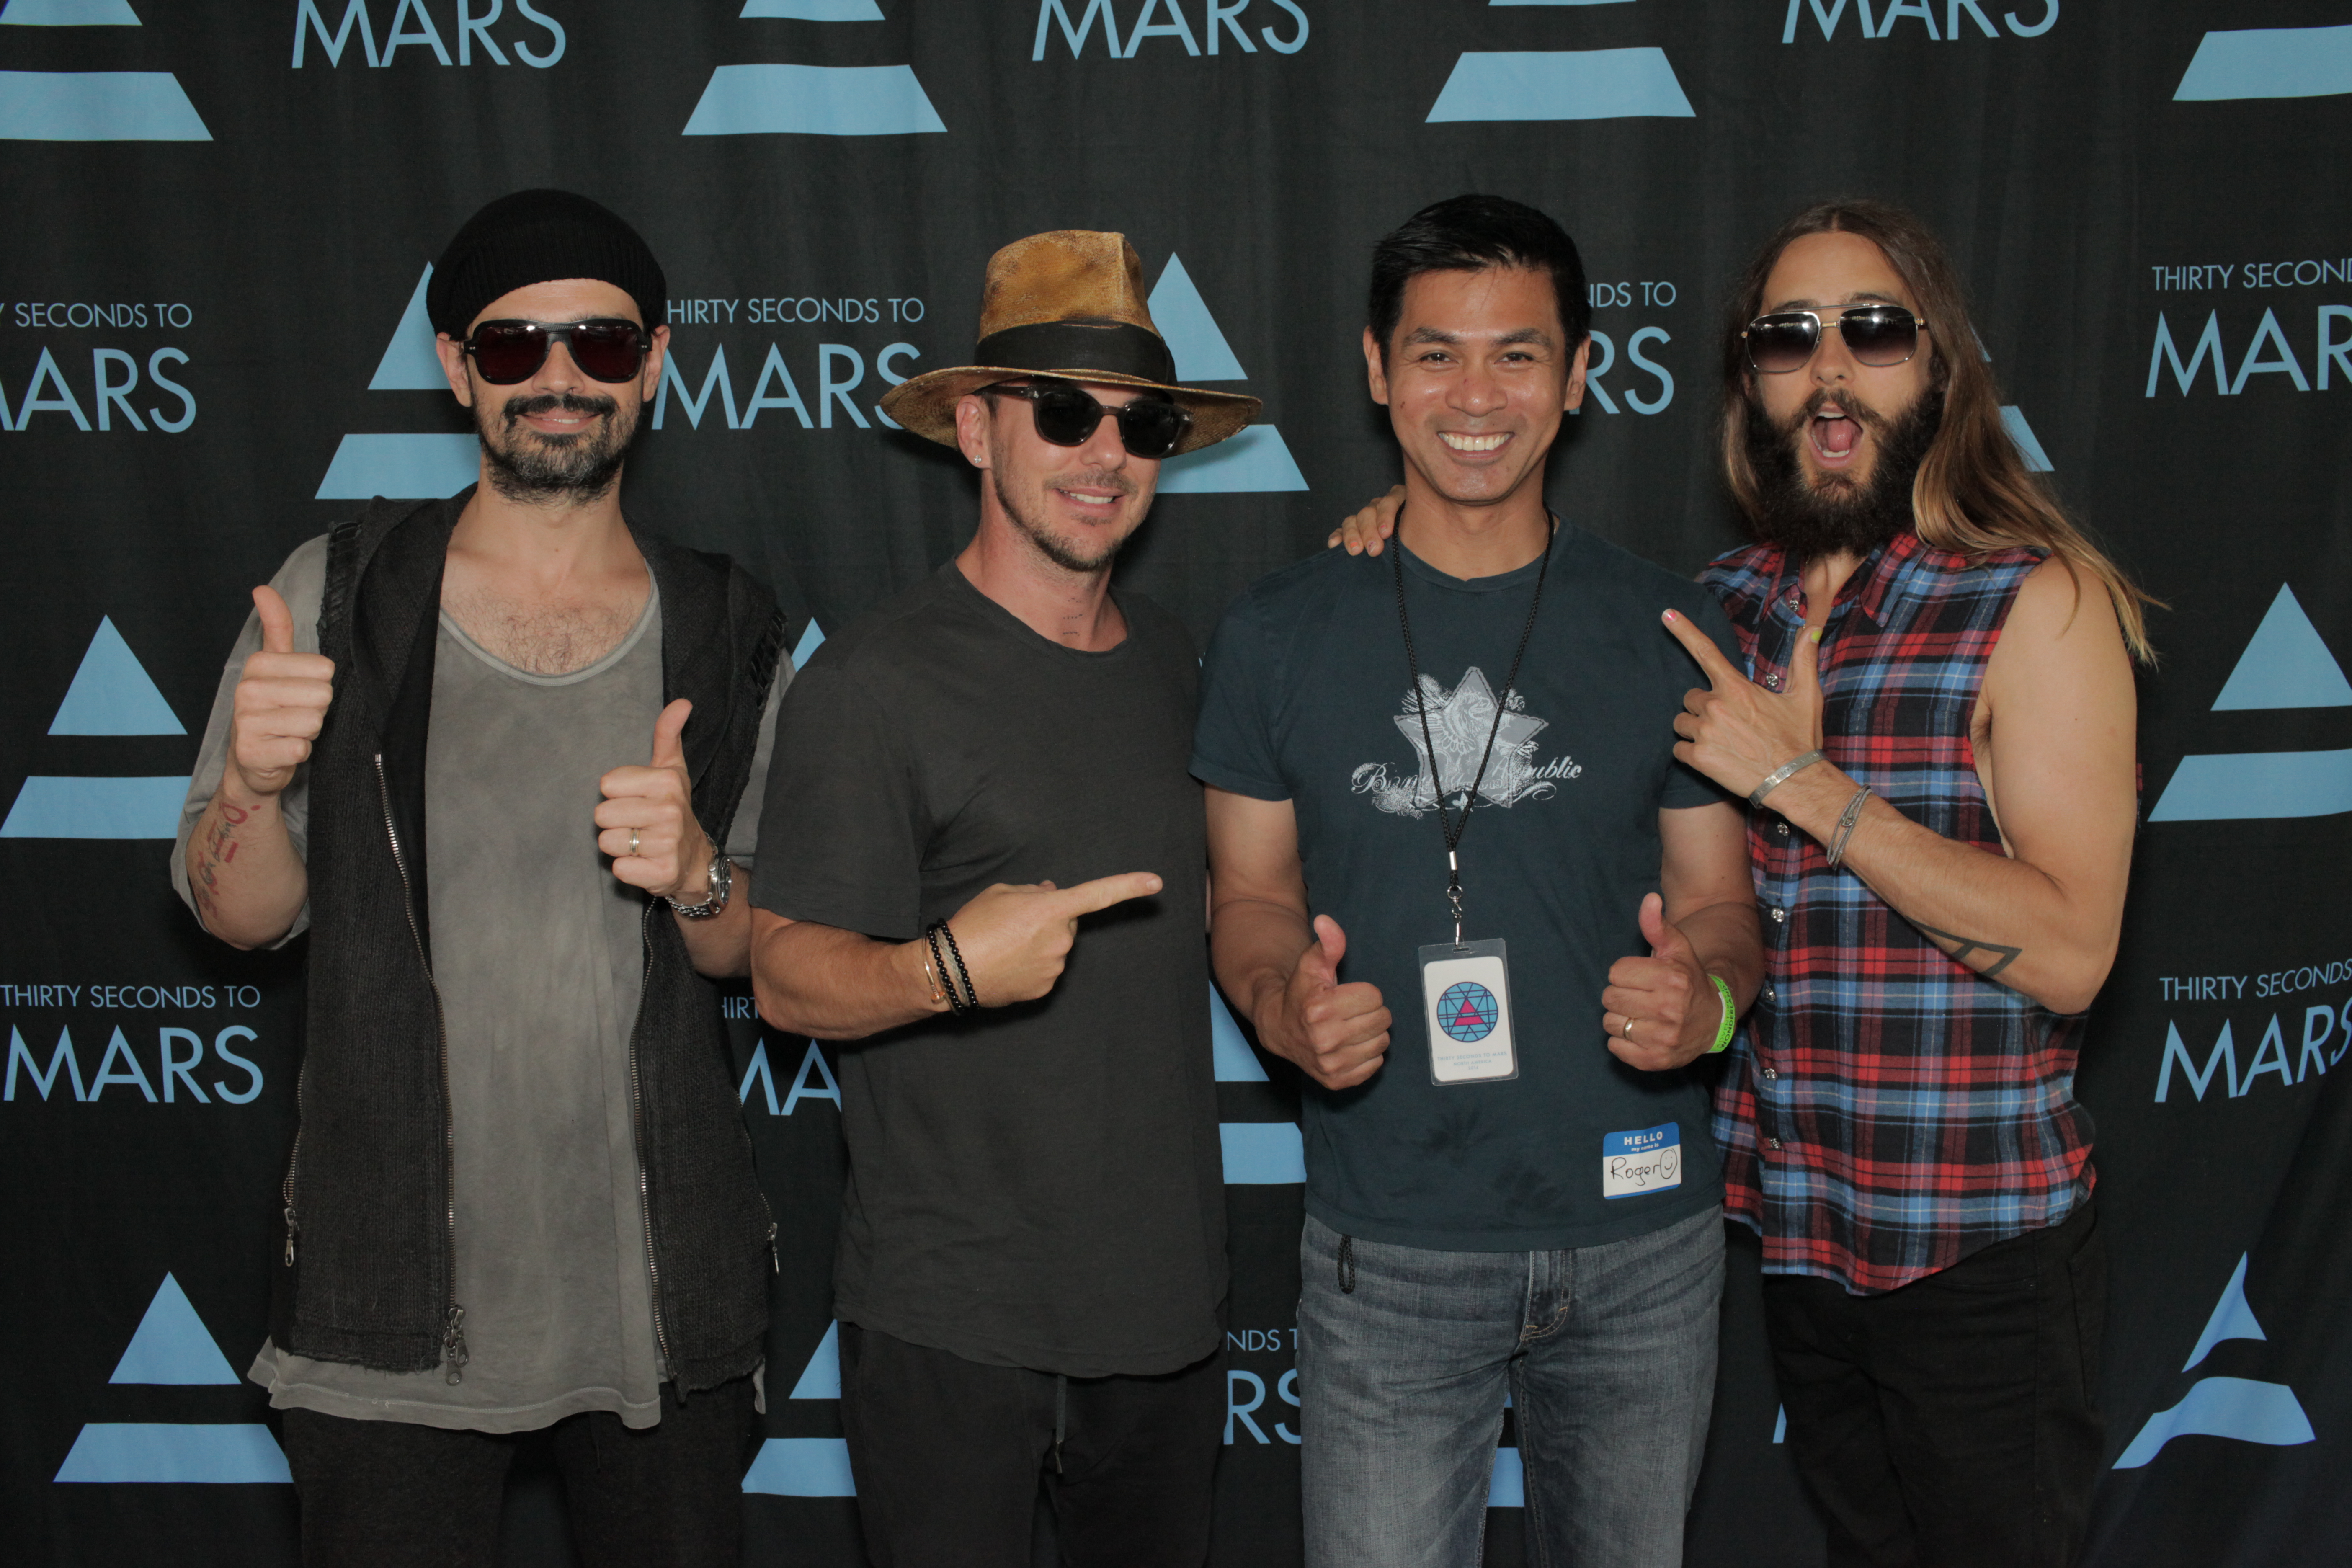 Thirty Seconds to Mars, an American rock band from Los Angeles, California. (L-R) Tomo Milicevic, Shannon Leto, Roger Anthony and Jared Leto. Jared Leto won the 2014 Academy Award for Best Actor in a Supporting Role for Dallas Buyers Club.